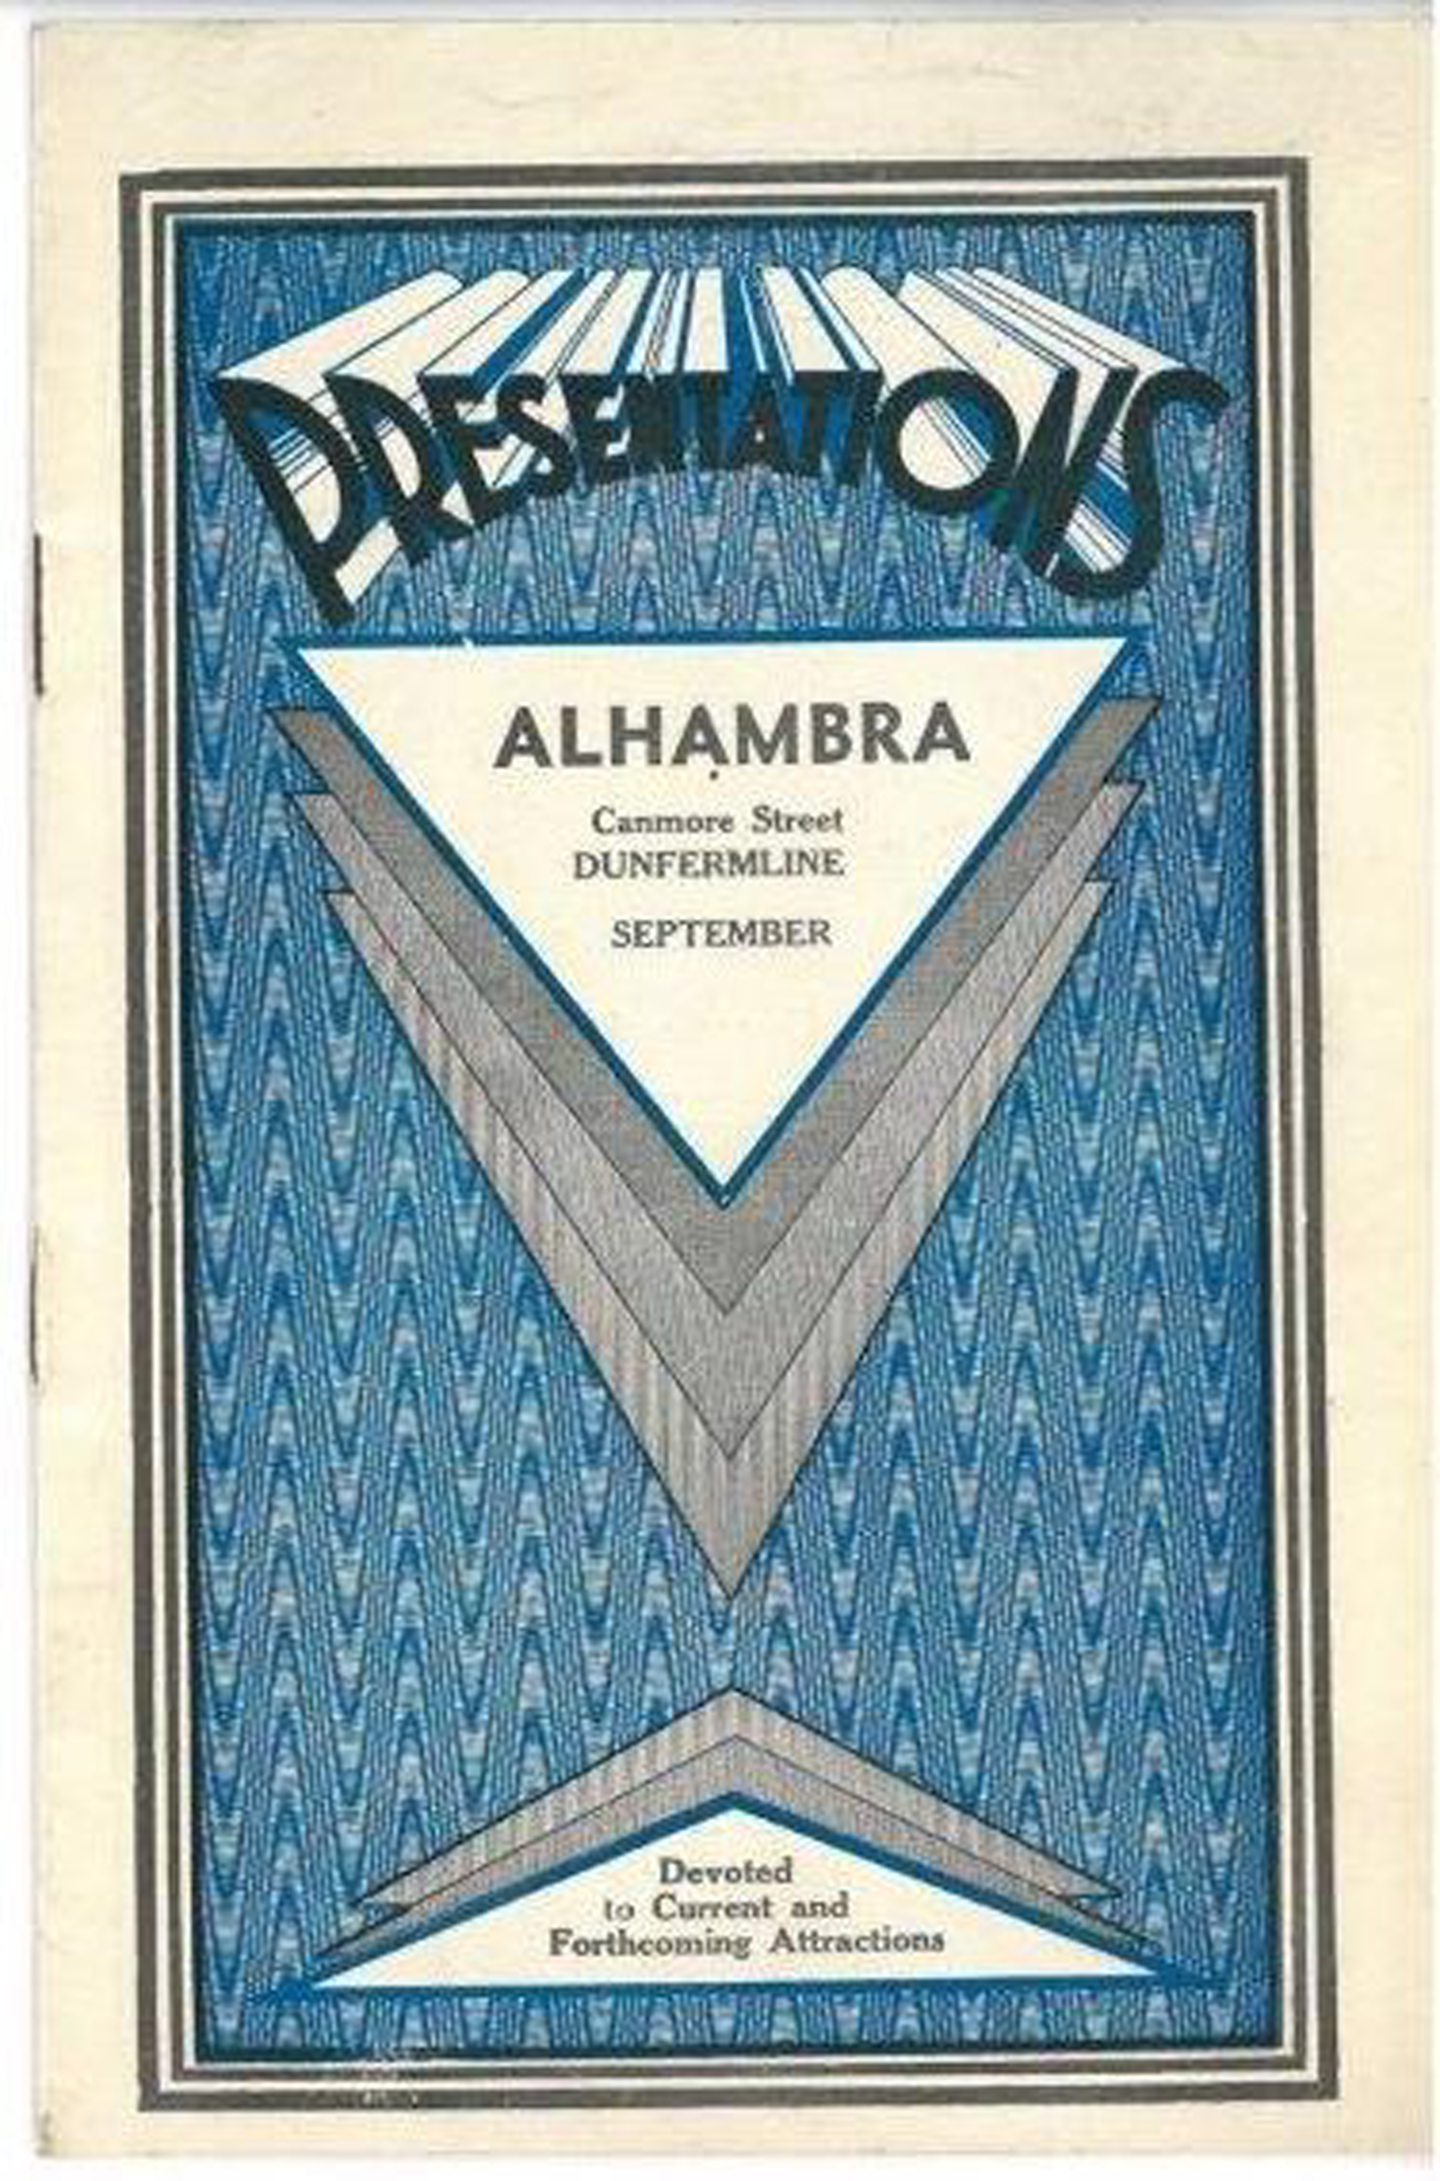 The programmes for the Alhambra were distinctly memorable with their bright blue covers.